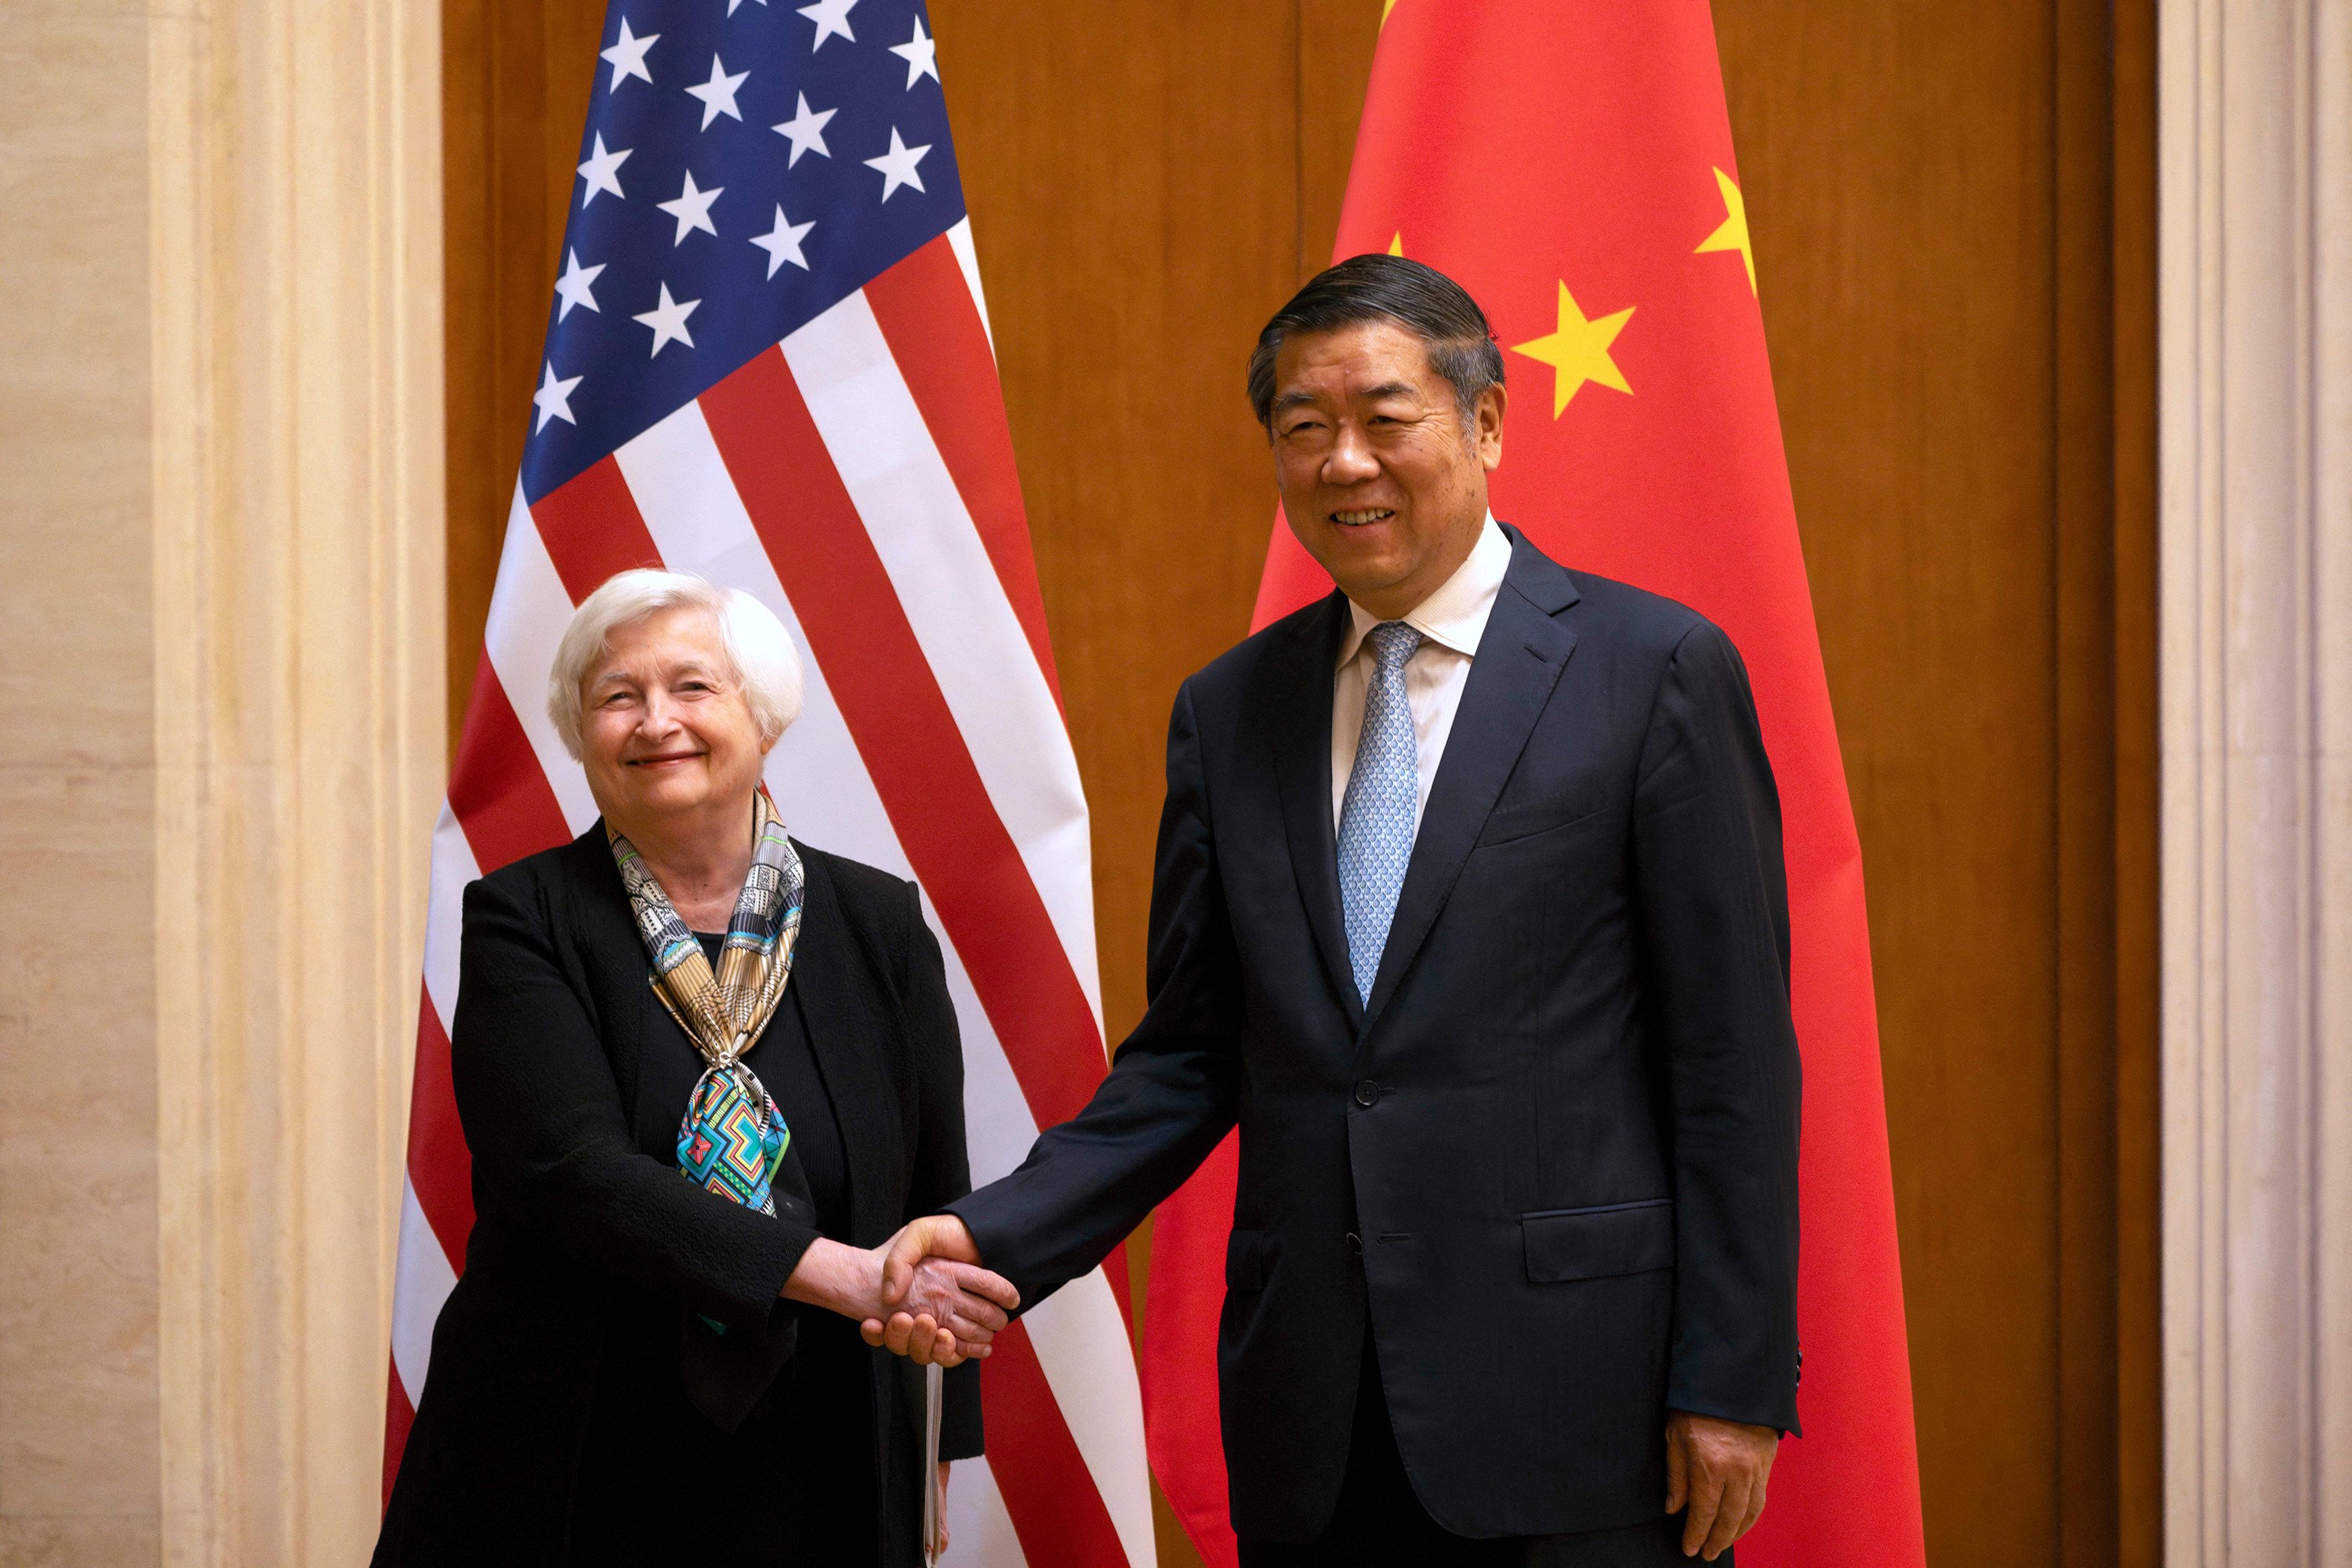 US Treasury Secretary Janet Yellen  shakes hands with Chinese Vice-Premier He Lifeng during a meeting at the Diaoyutai State Guesthouse on Saturday. Photo: Pool